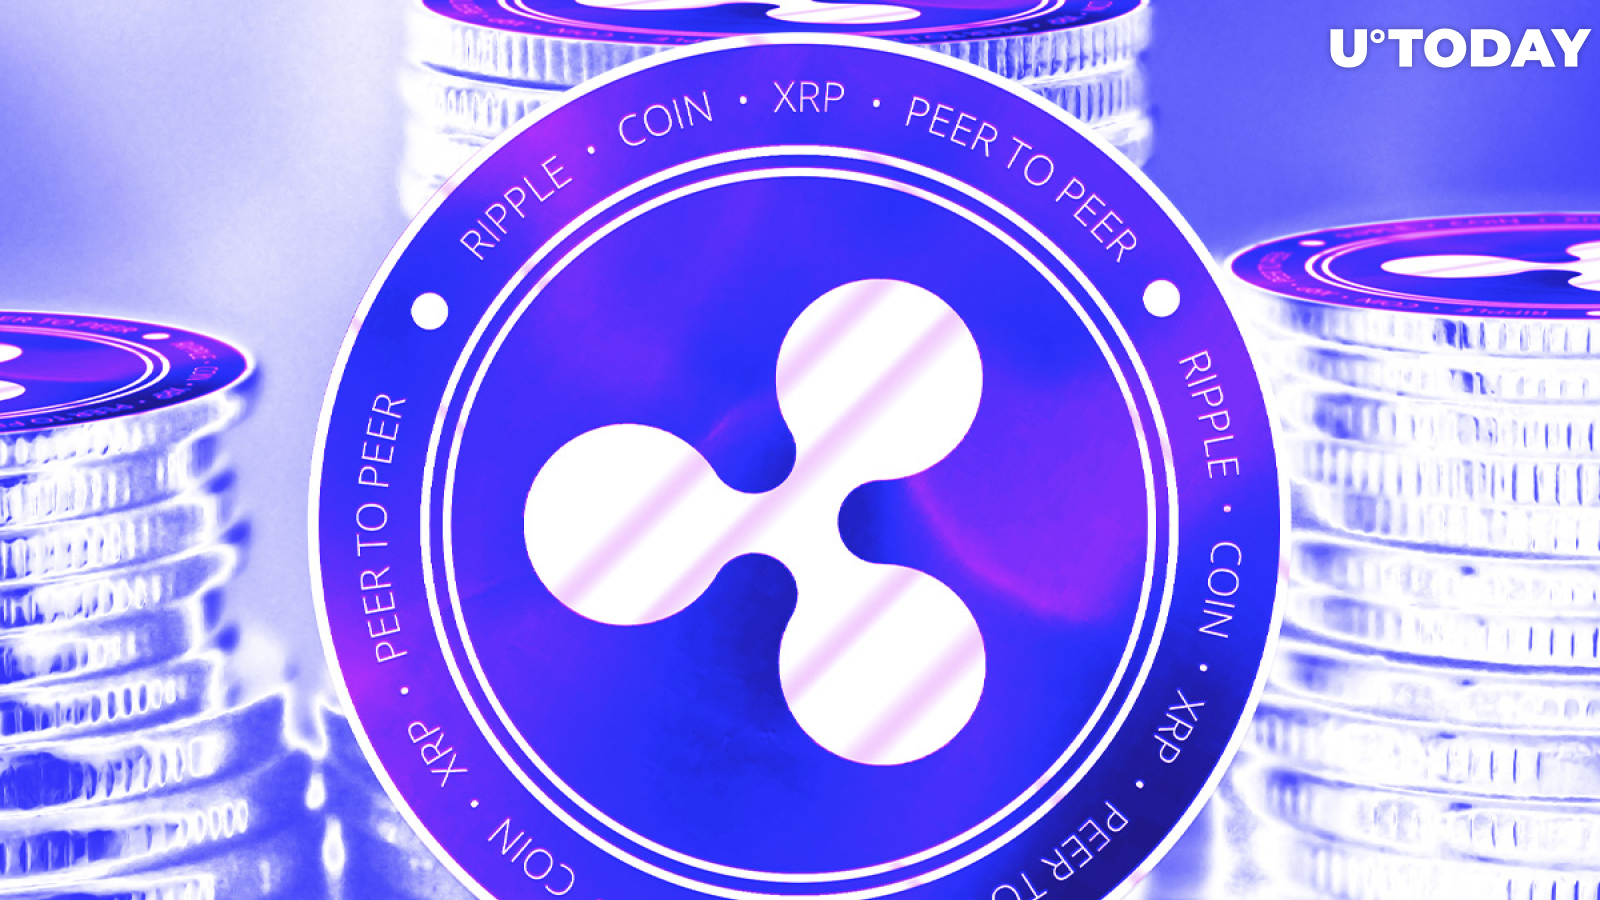 "Ripple Brings Clarity": David Gokhshtein Posted a Tweet About the Crypto Industry